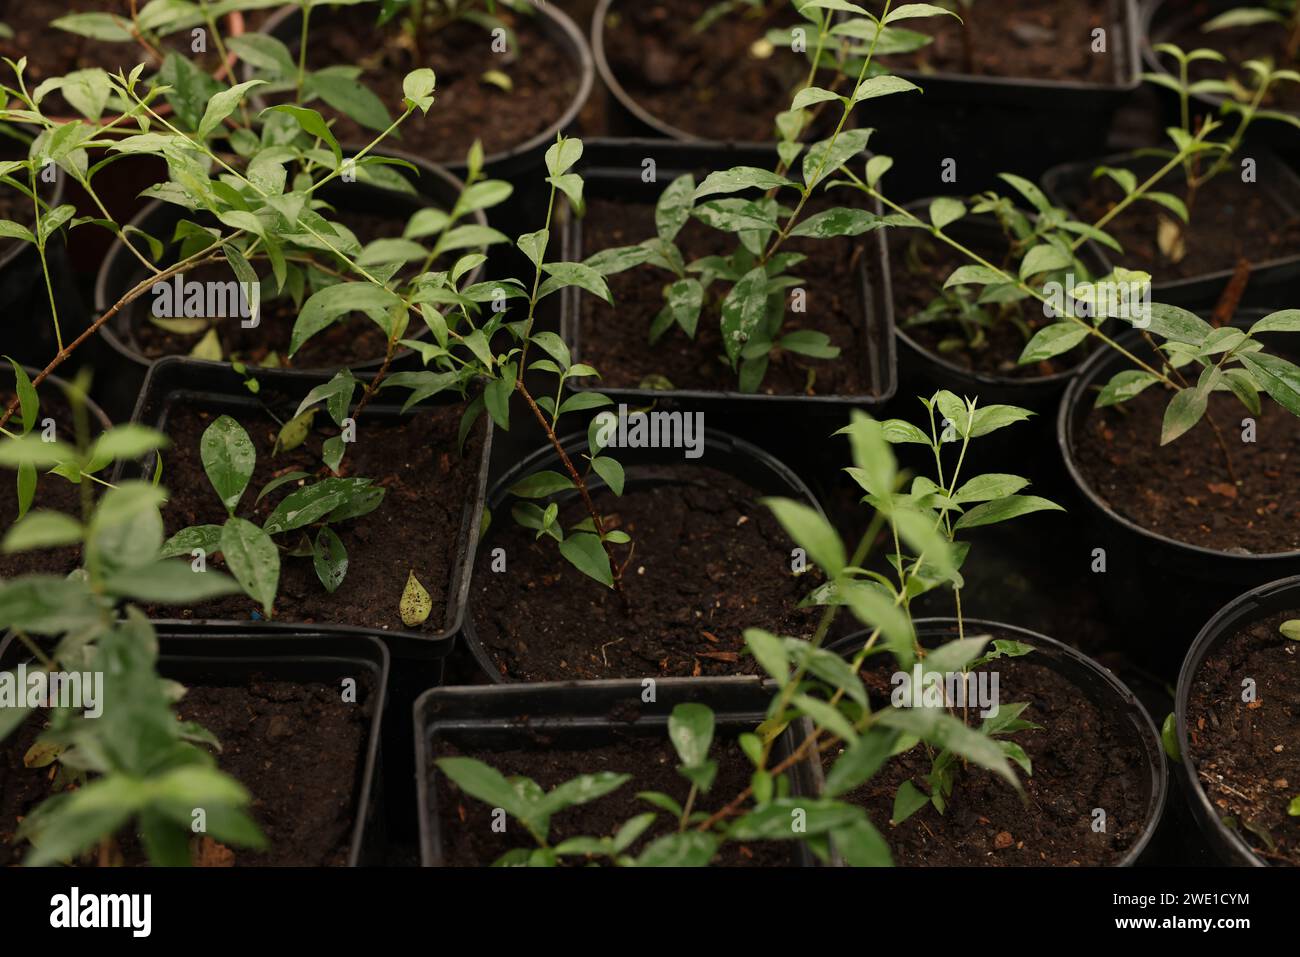 Potted Malpighia glabra plants growing in greenhouse Stock Photo